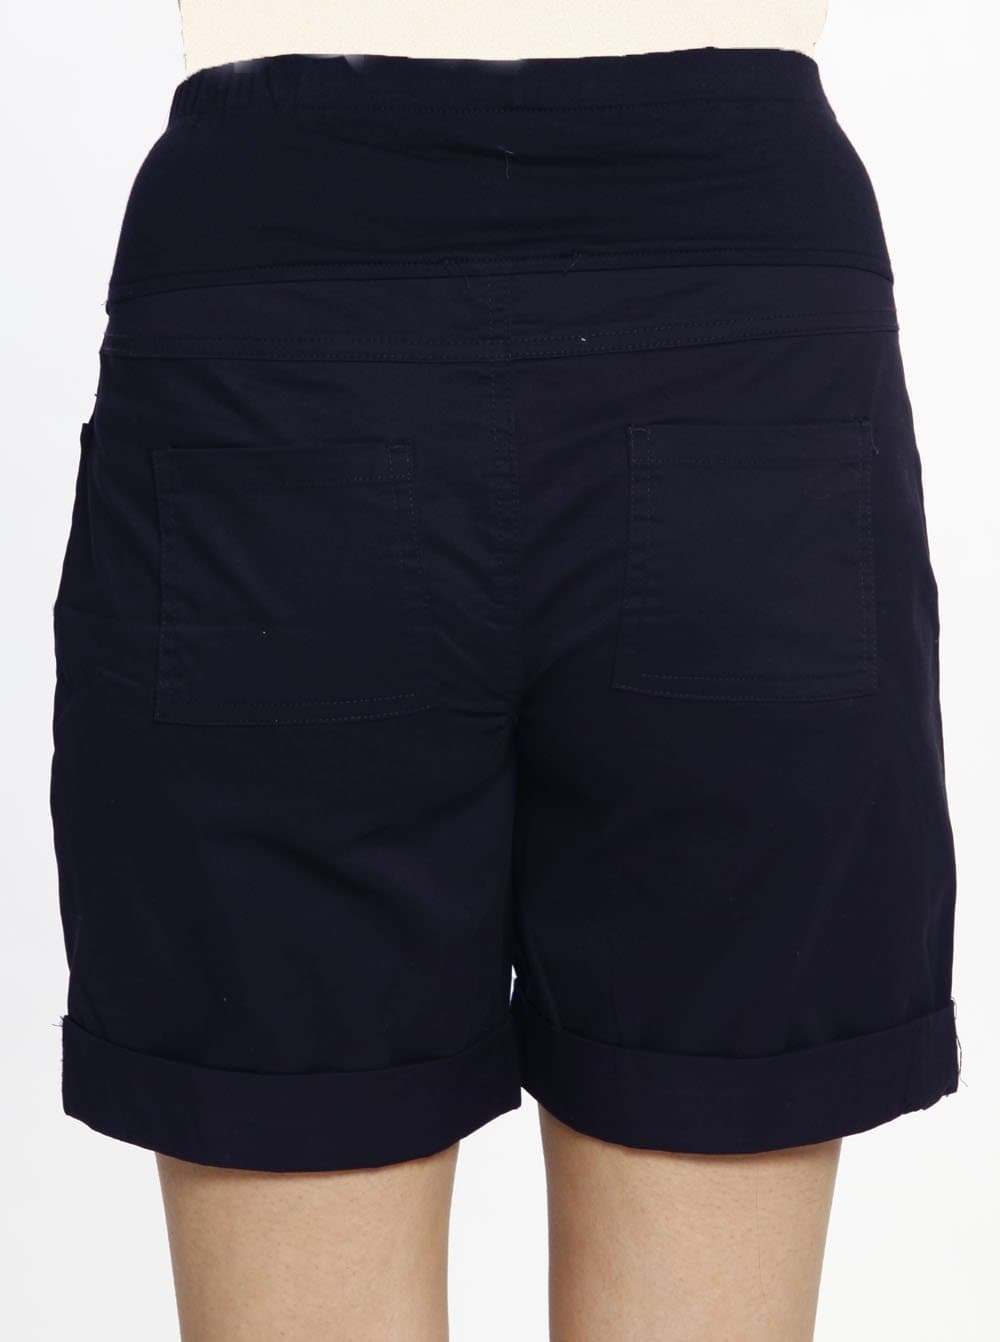 Cotton Maternity New Summer Shorts in Navy - Angel Maternity - Maternity clothes - shop online (1573893865575)